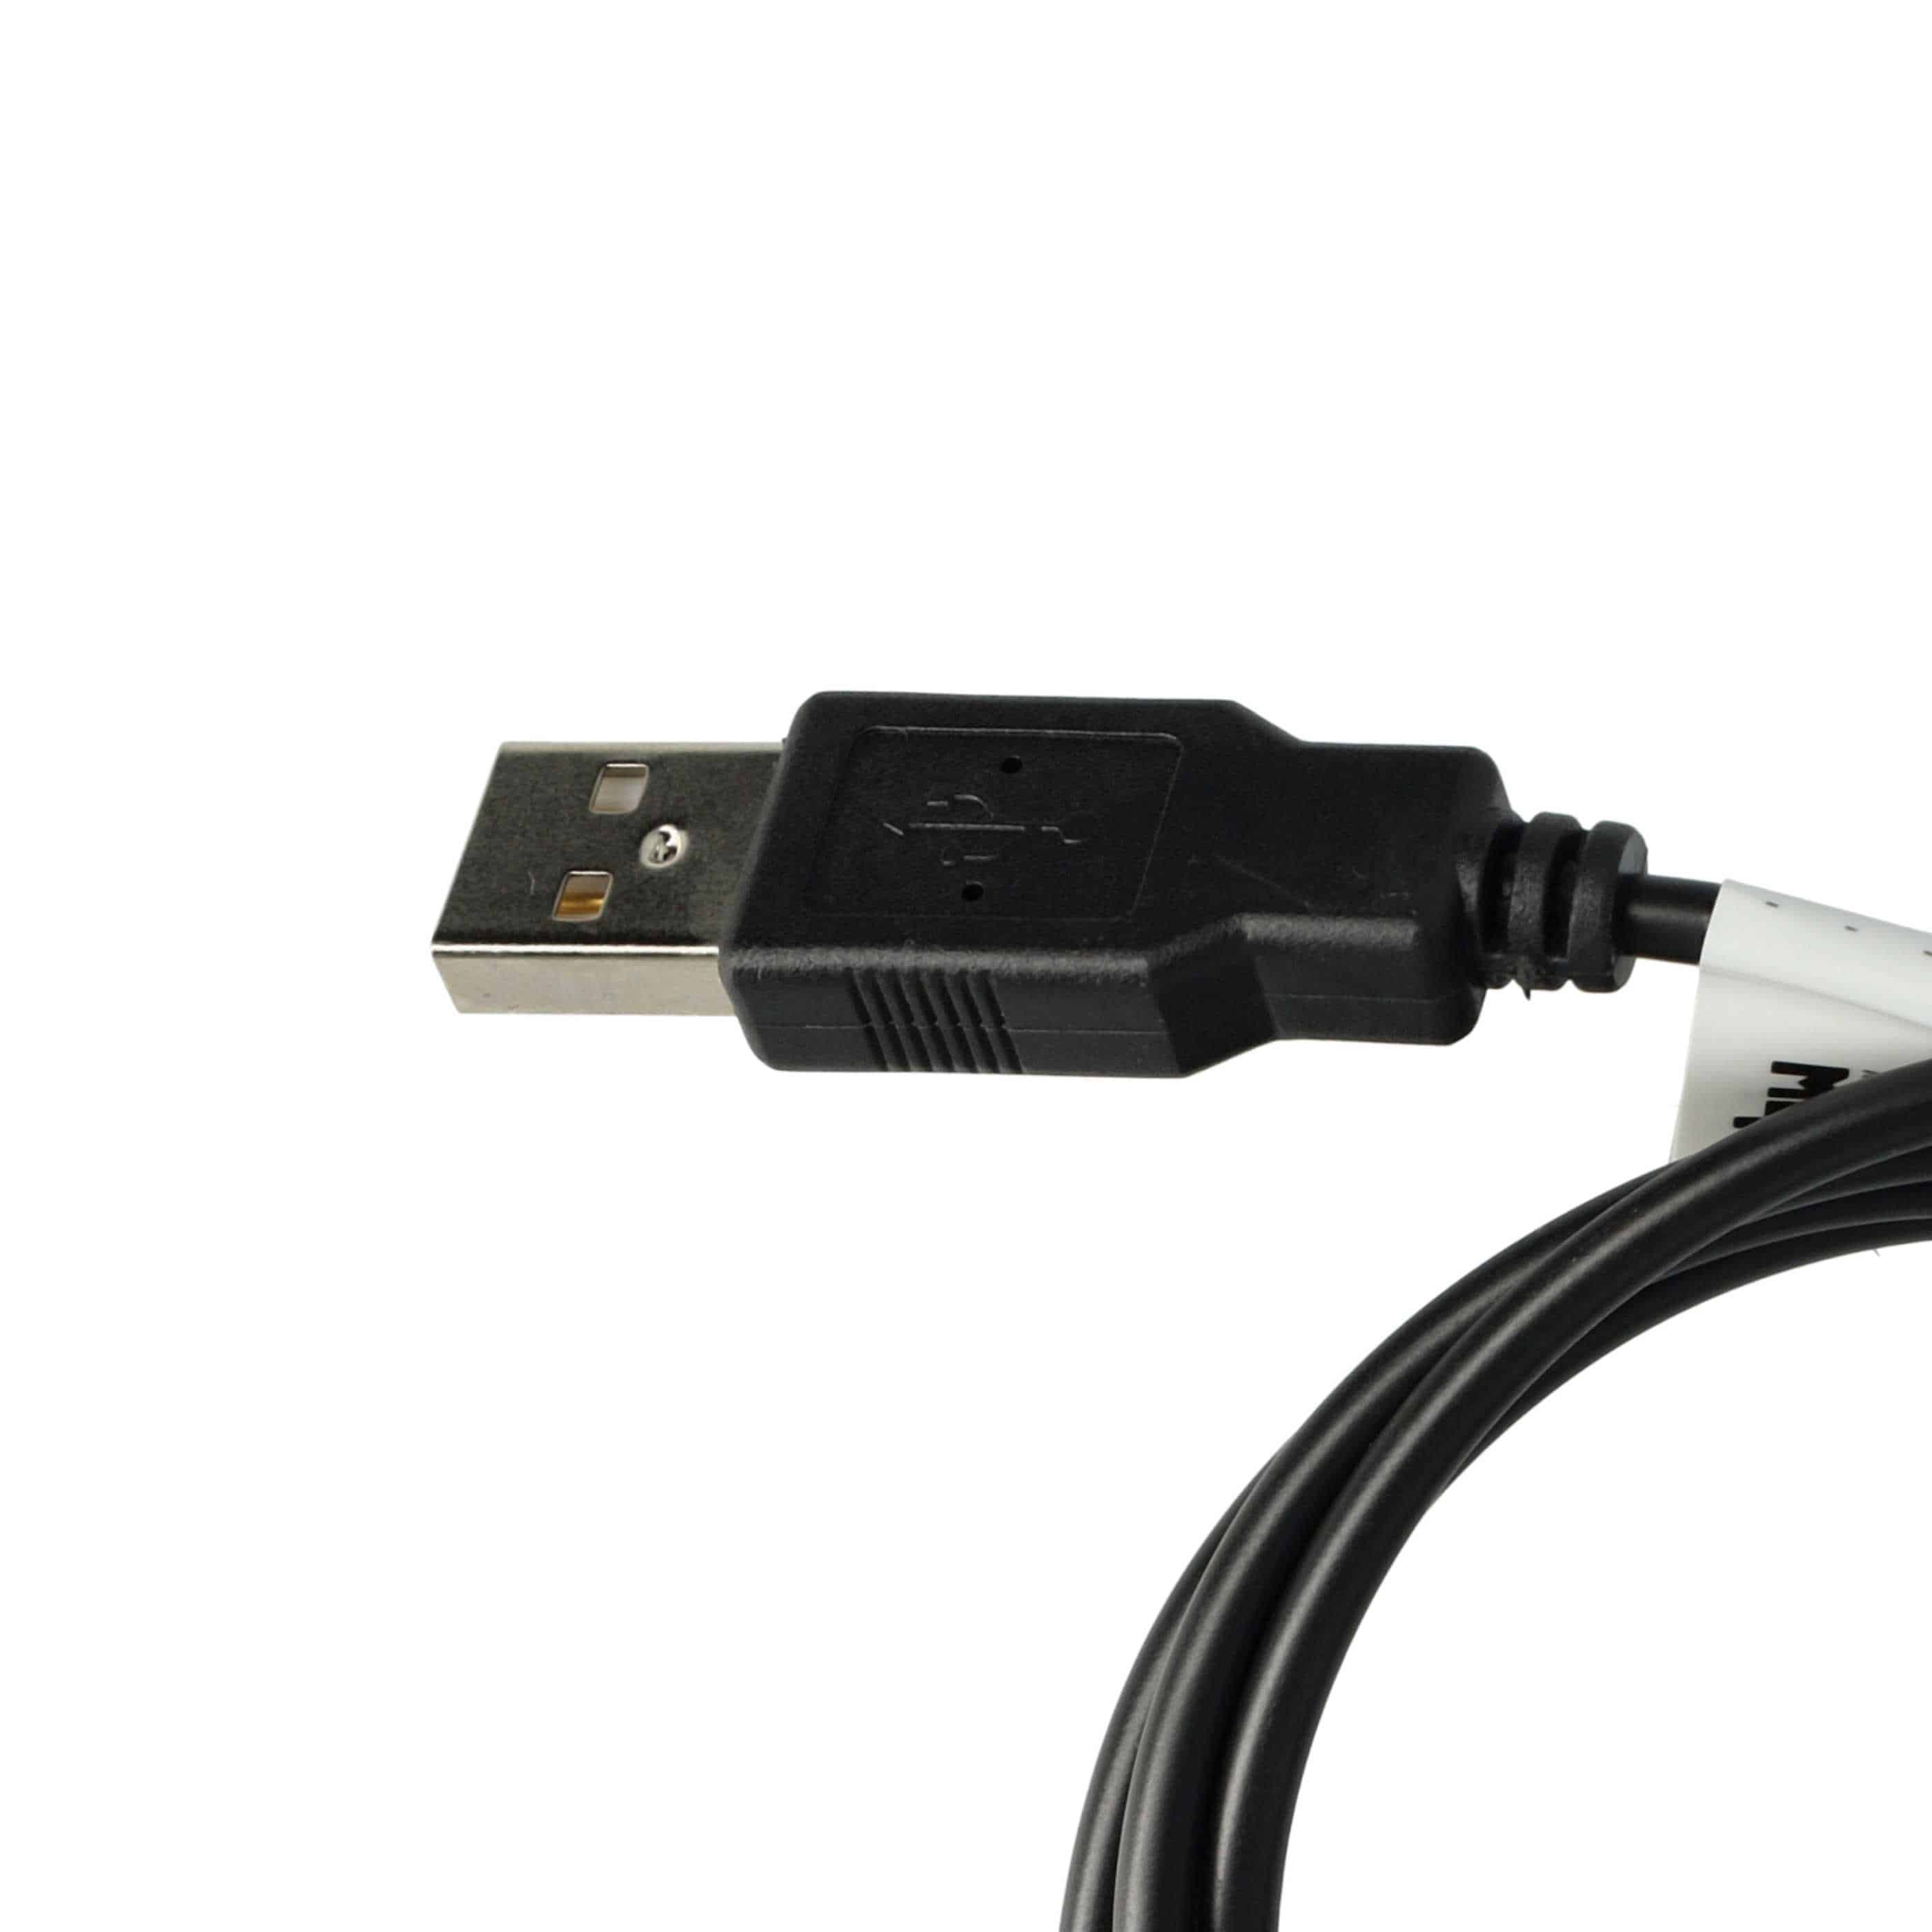 Universal USB Data Cable 2in1 Charger for all Standard GPS Sat-Nav Devices - 100cm Black